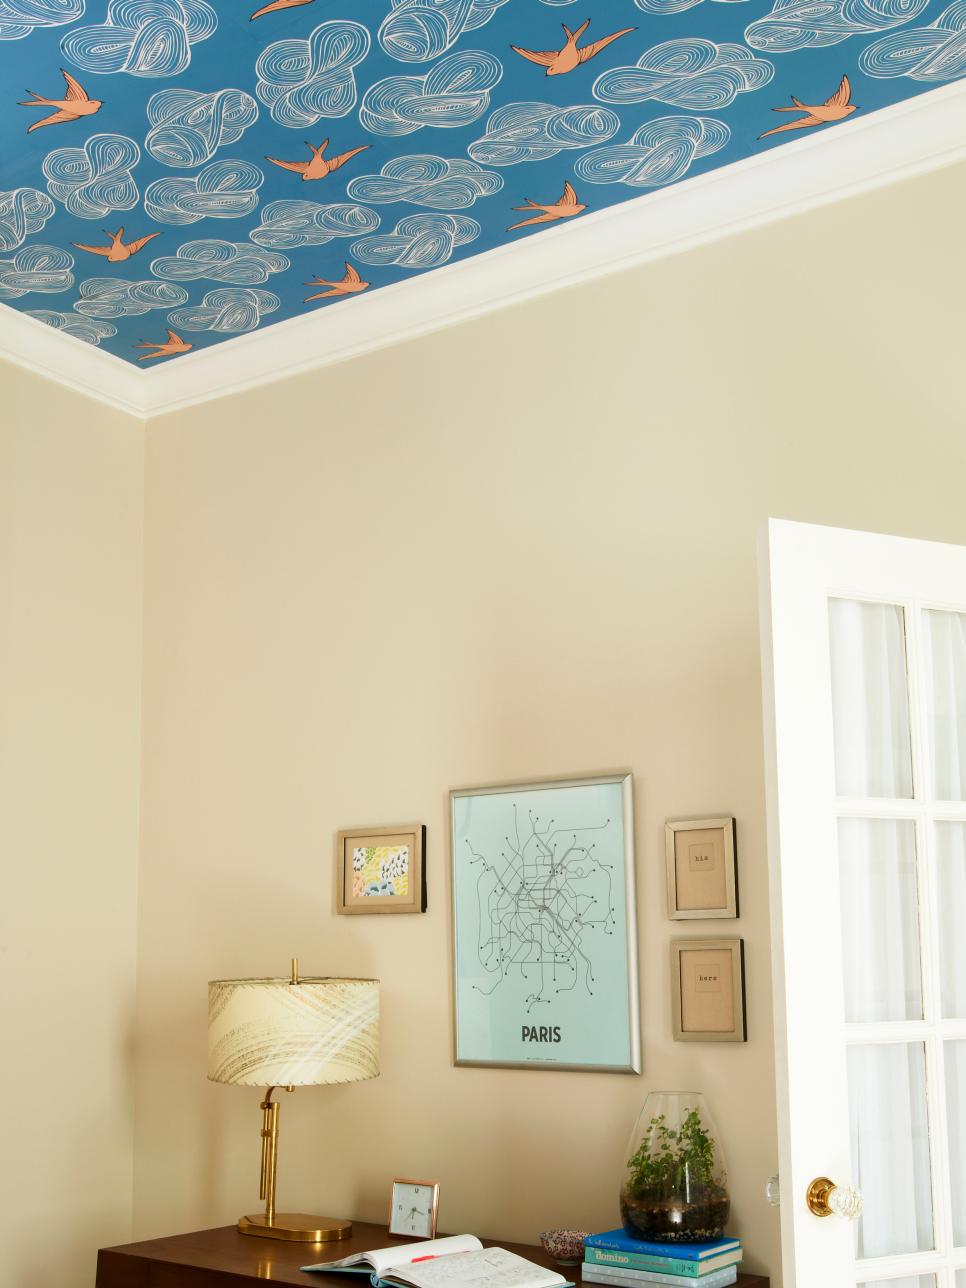 http://www.hgtv.com/remodel/interior-remodel/how-to-wallpaper-a-ceiling-pictures